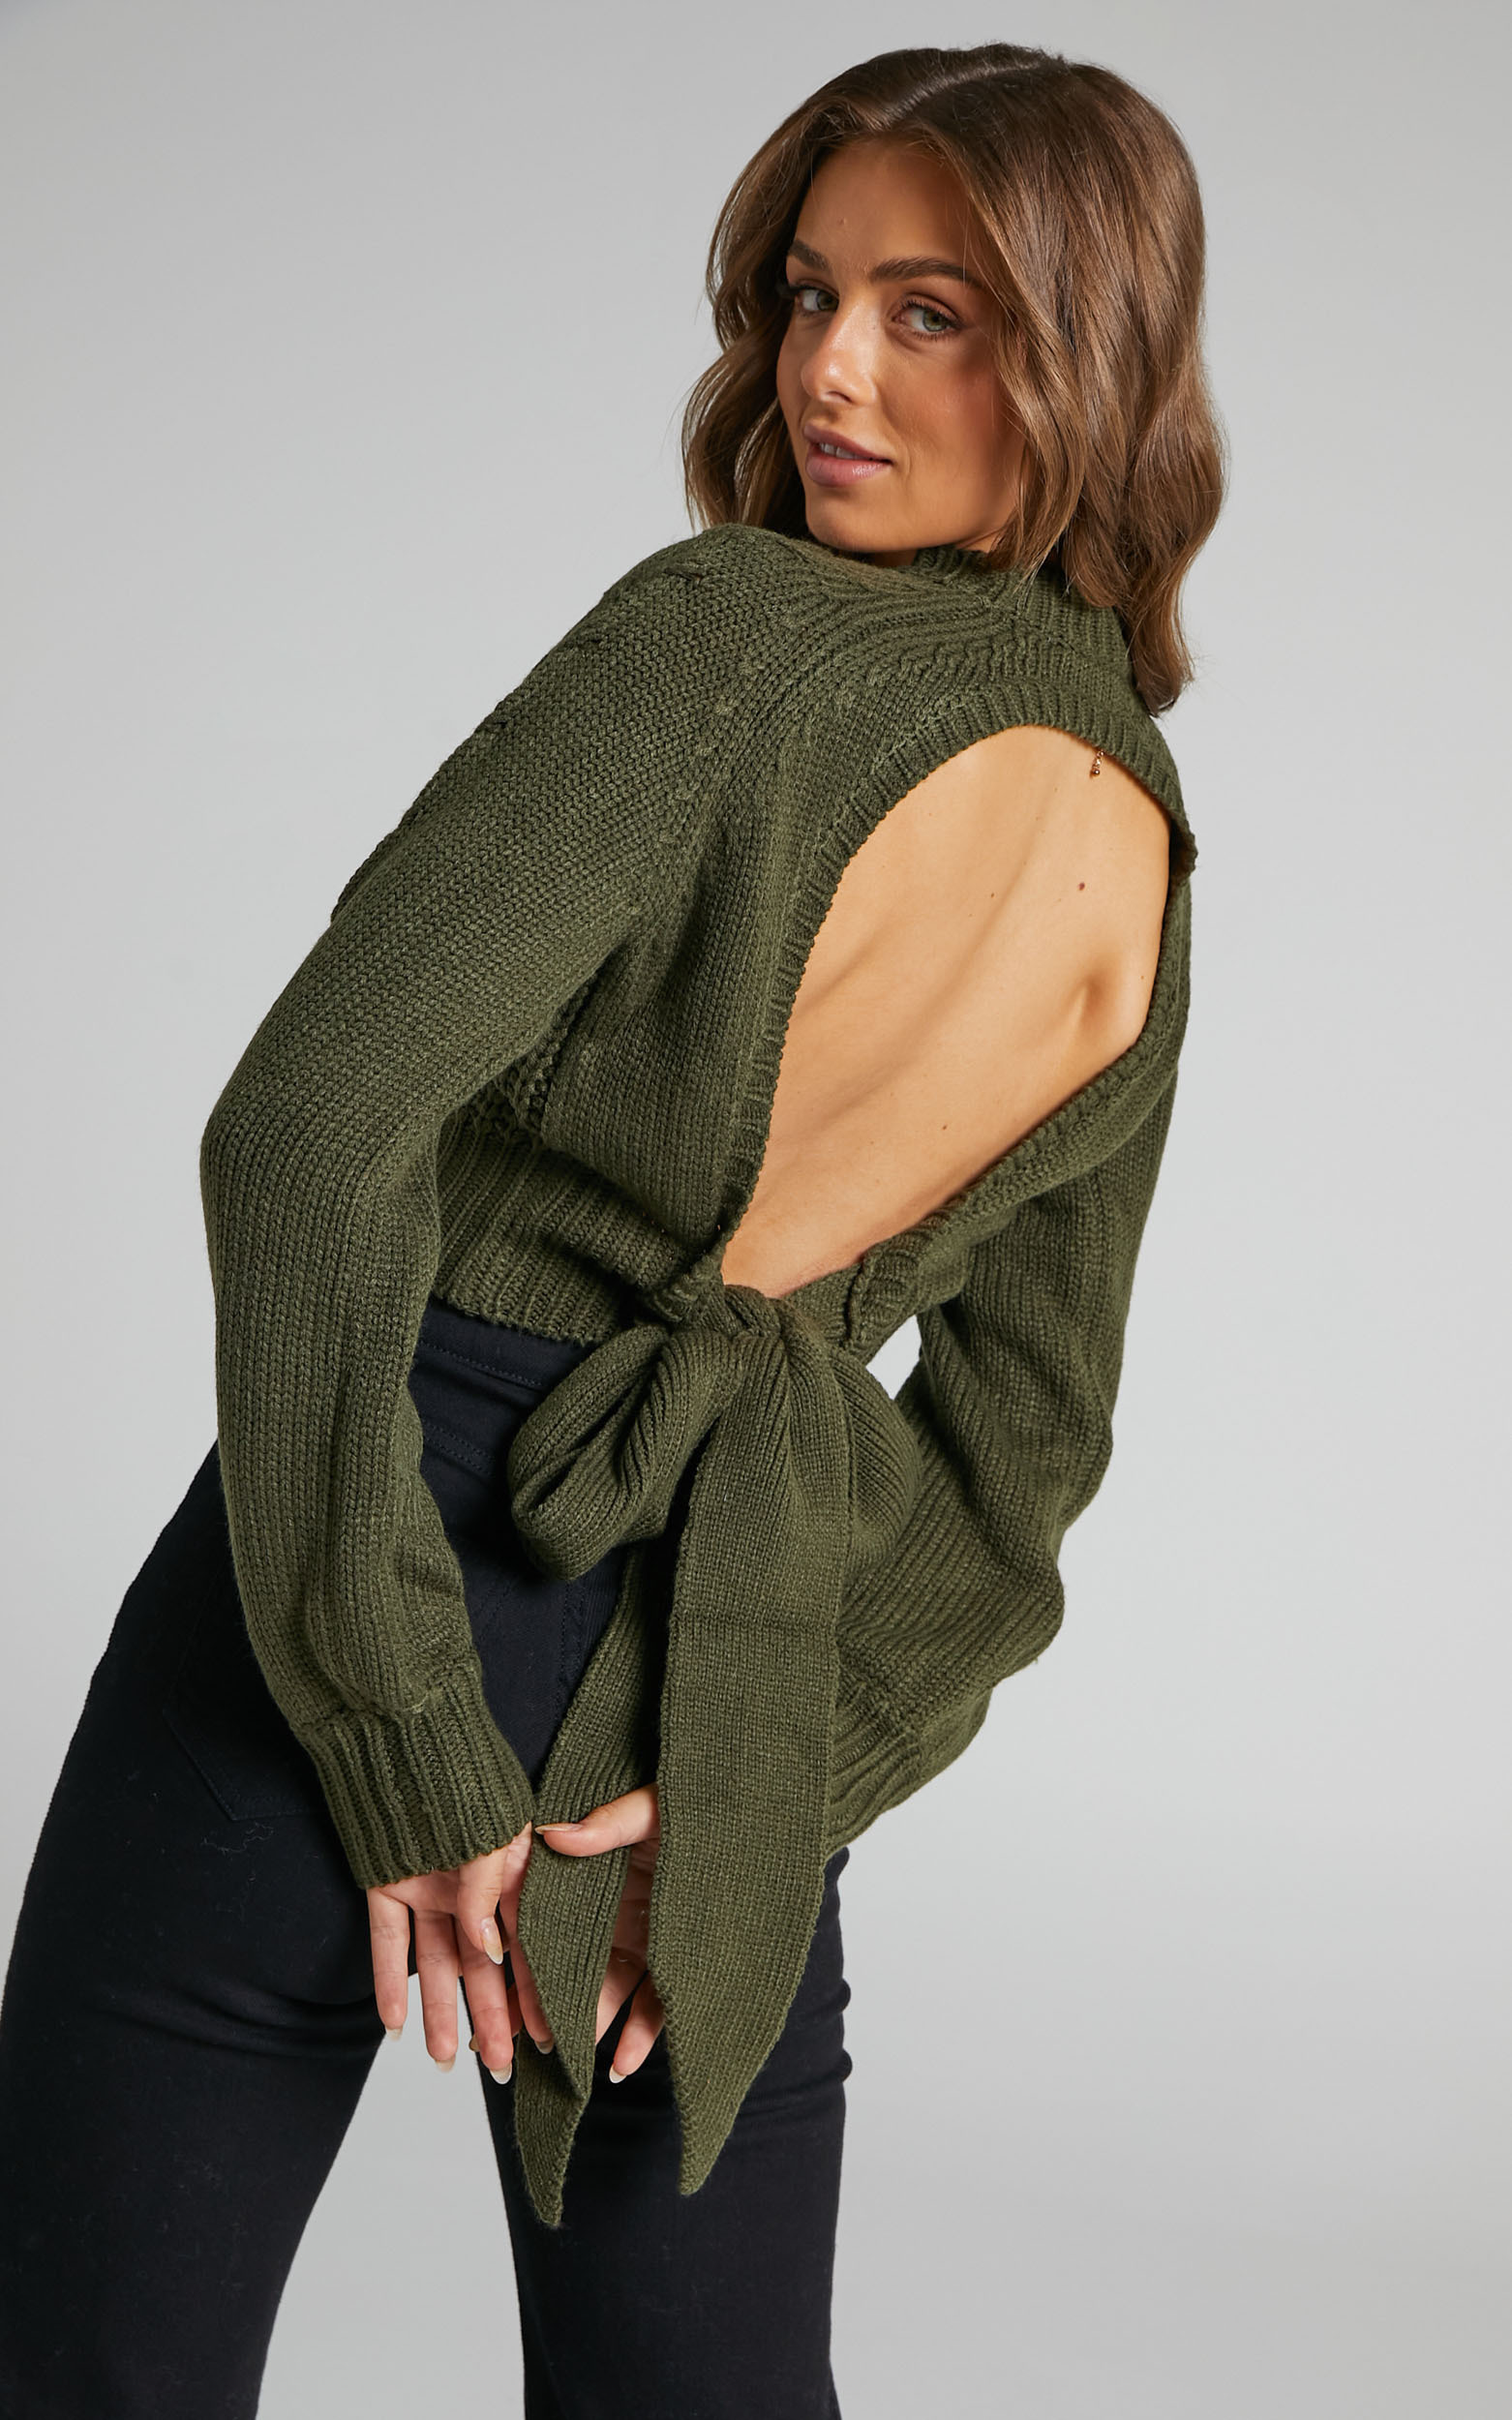 Maue long sleeve open back knit top in Khaki - 06, GRN1, hi-res image number null